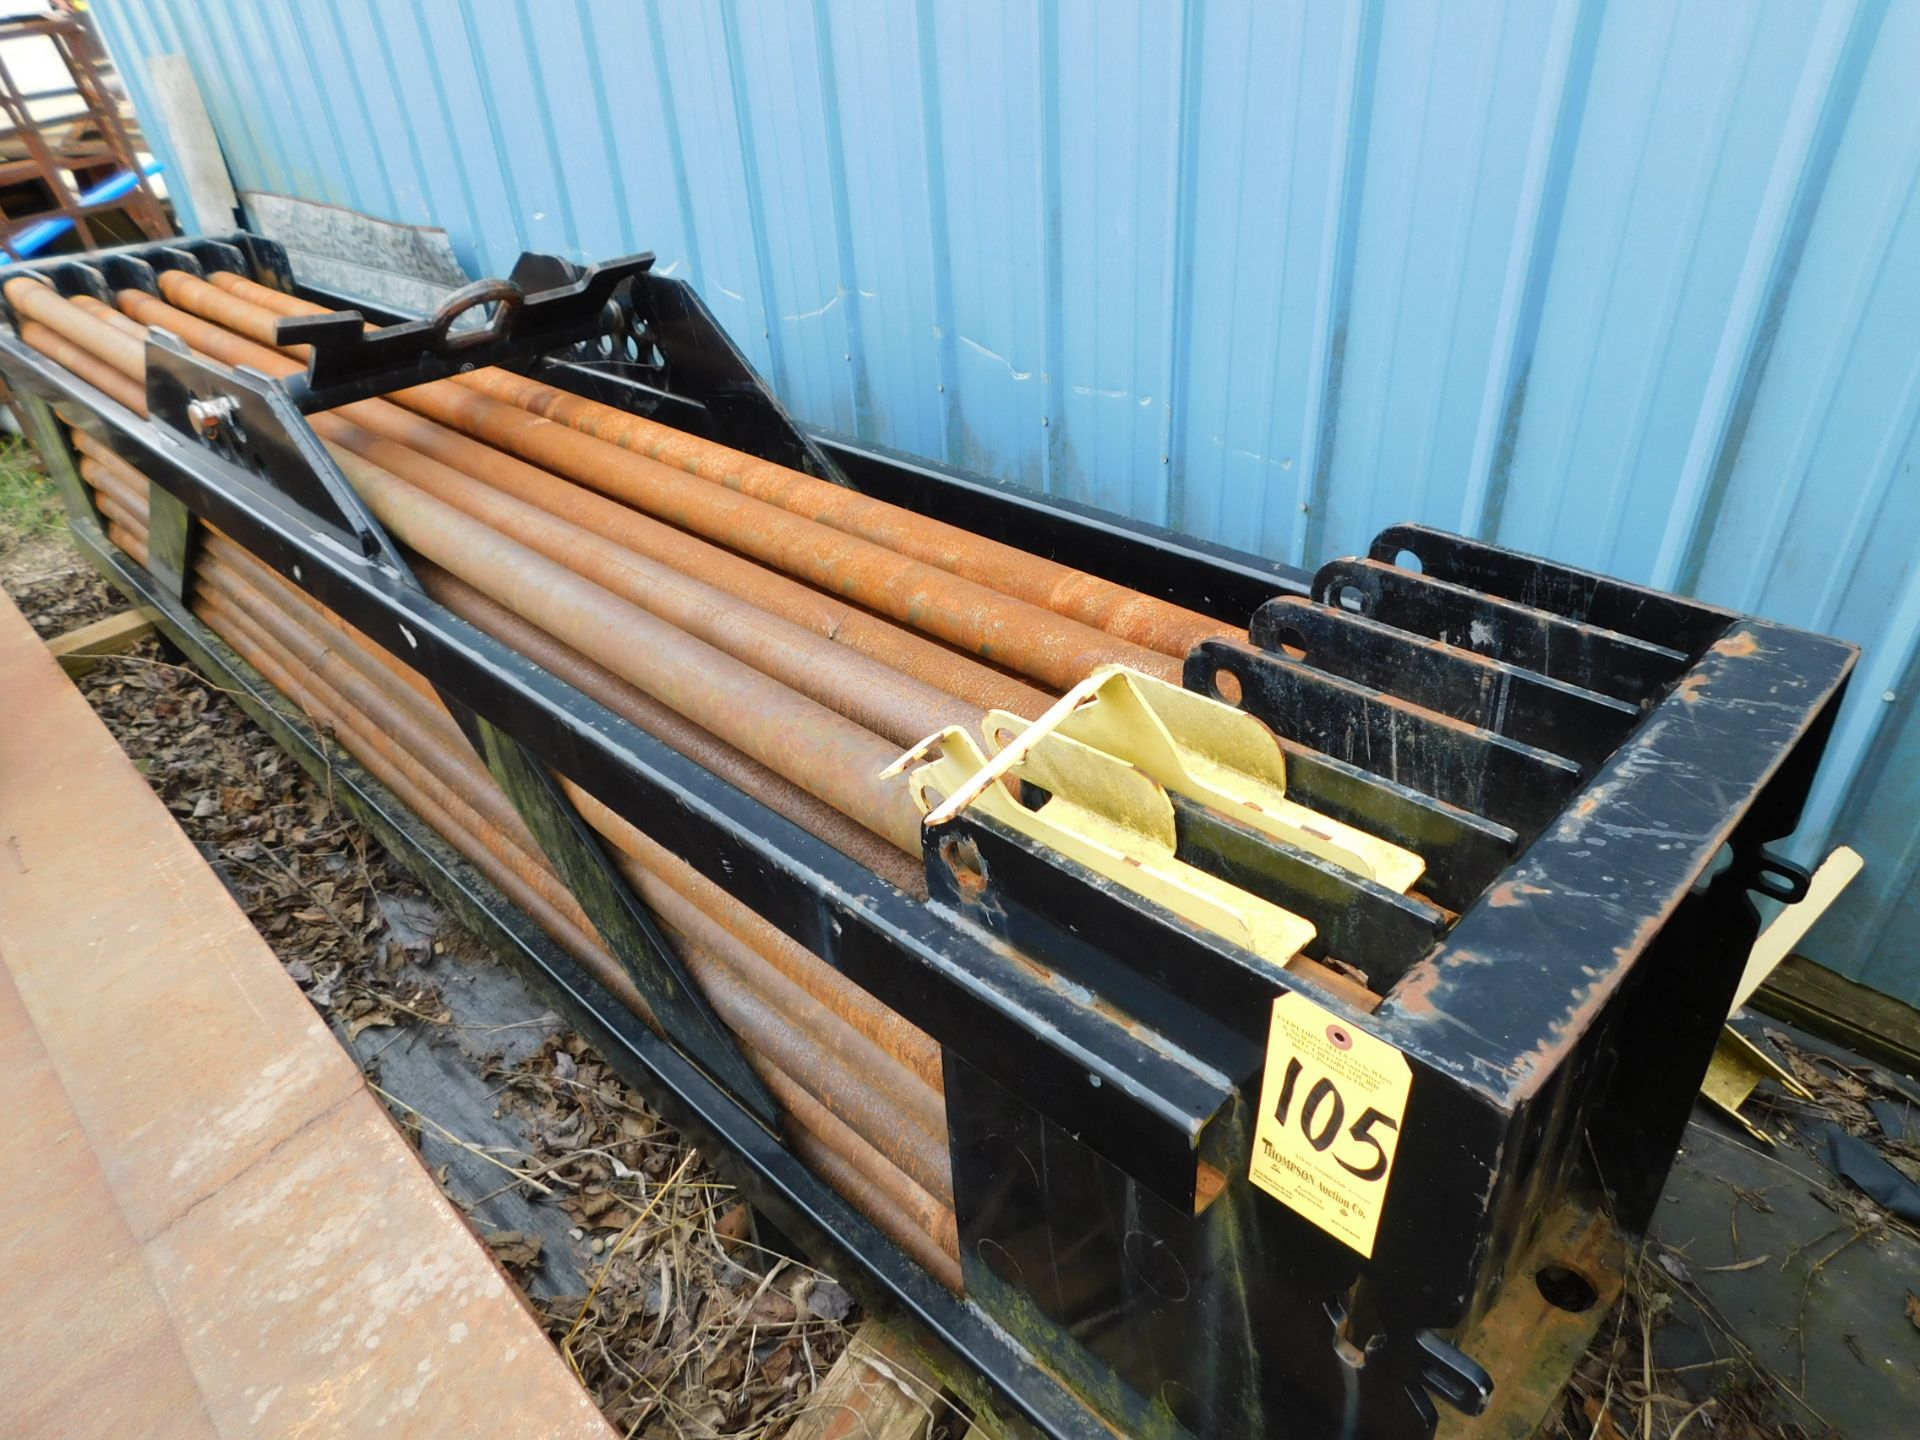 Ditch Witch Rod Box with Approx. 450' of Dirt Rod for Ditch Witch JT3020